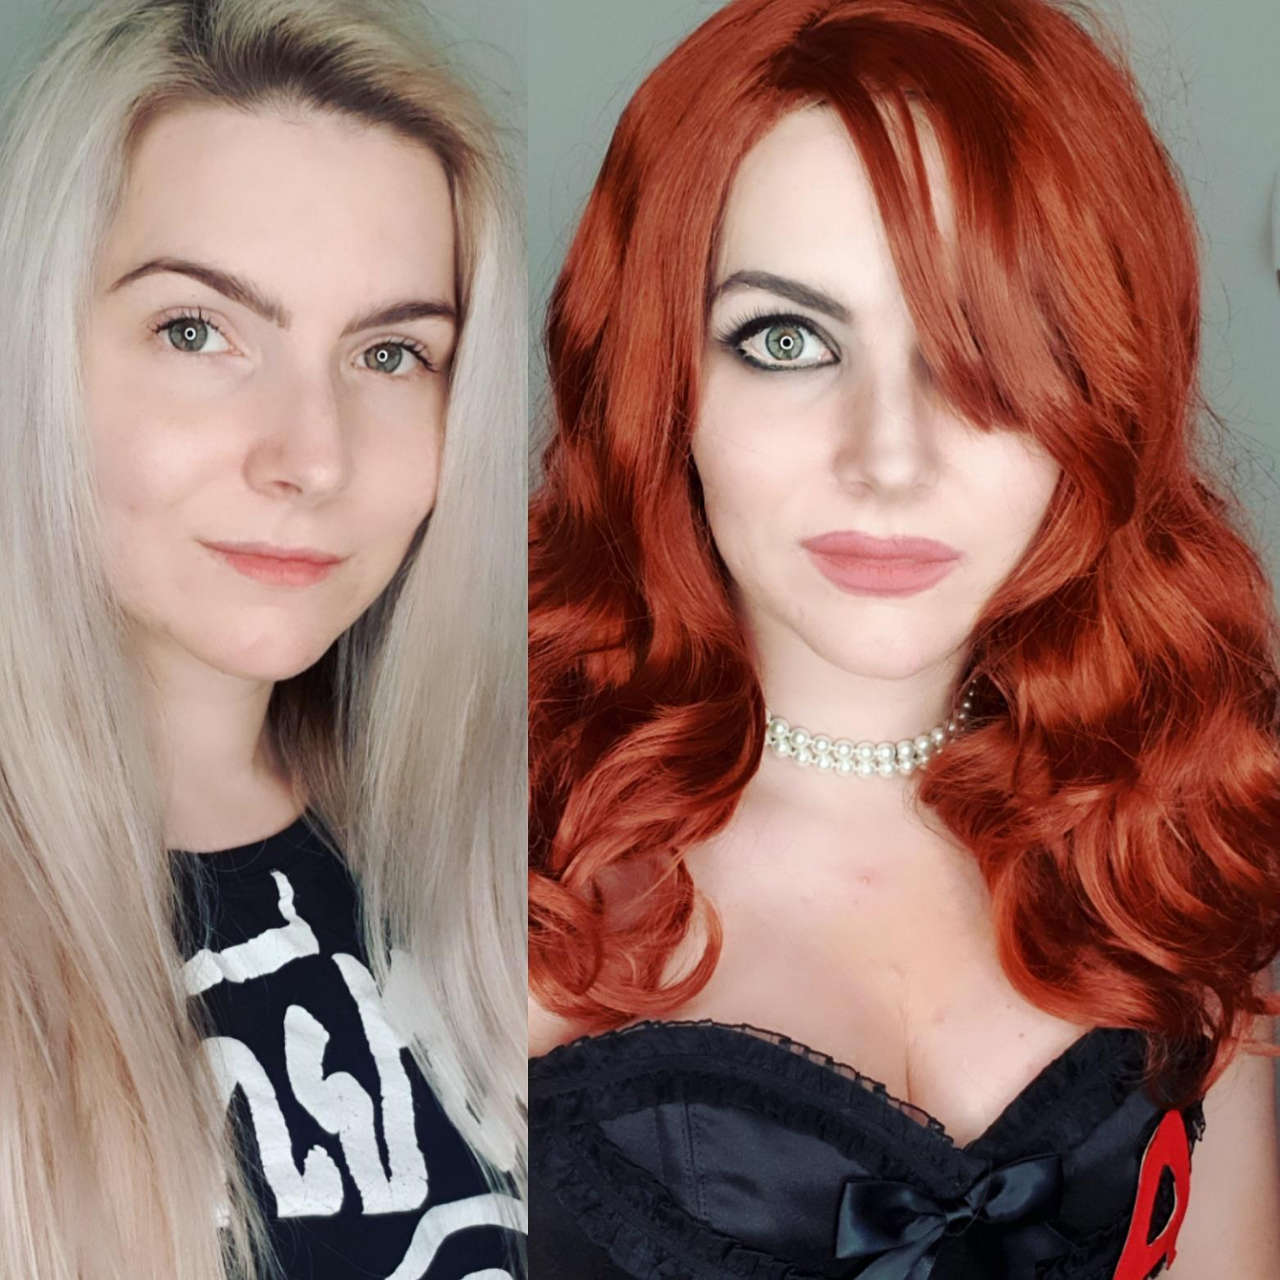 Before And After Olive Penderghast From Easy A By The Crystal Wol